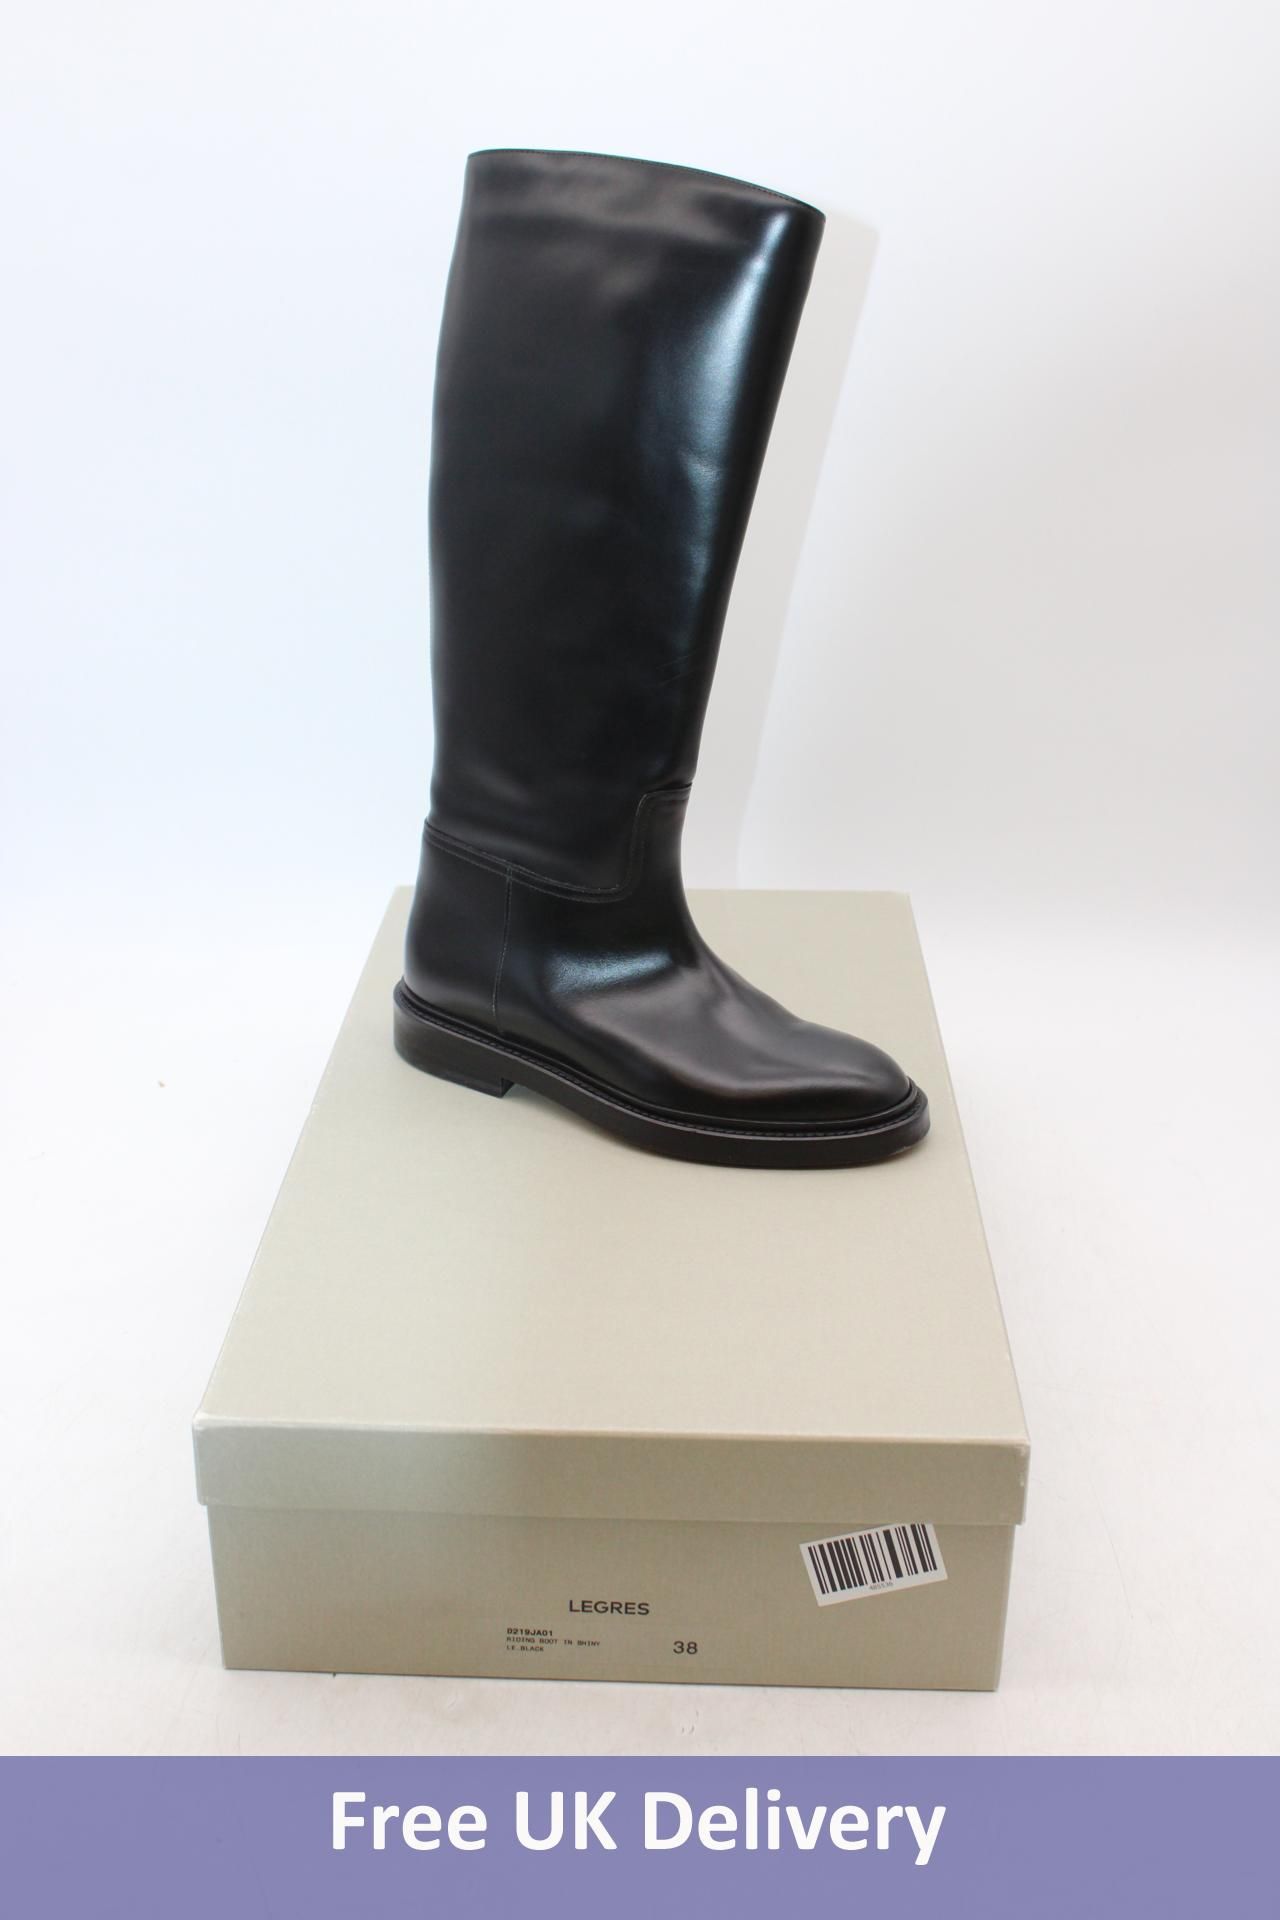 Legres Asymmetric Riding Boots, Shiny Black, Size 38, Some Marks to Uppers and Soles